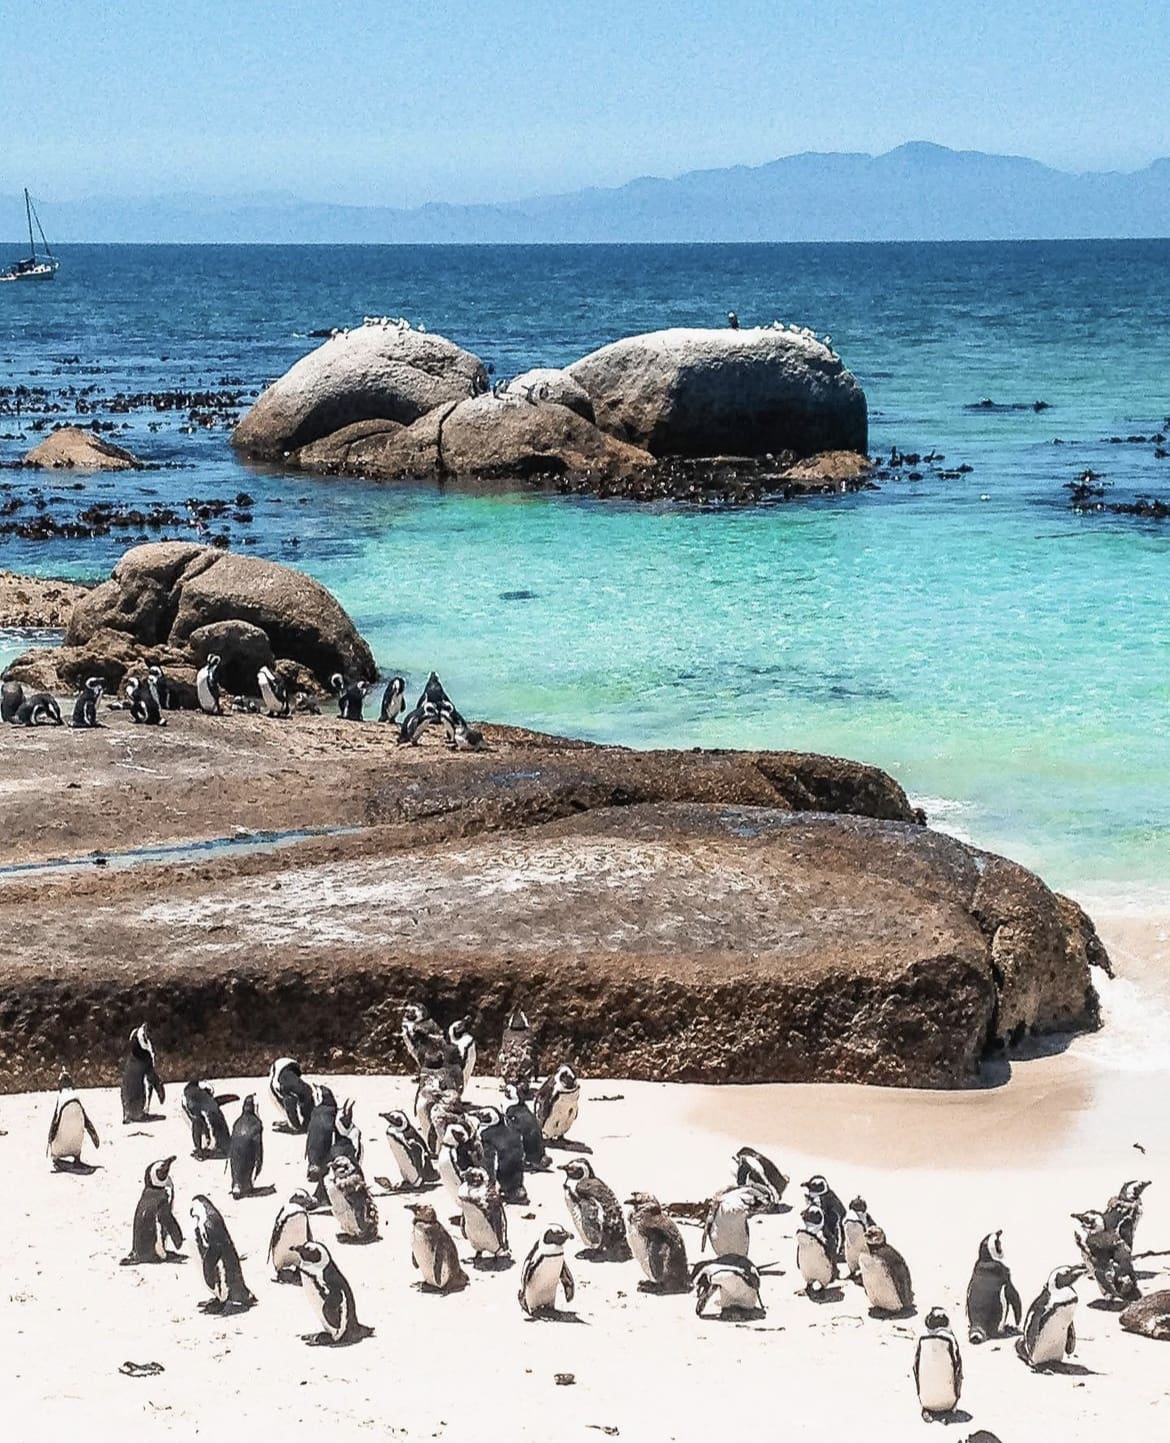 Group of penguins on the beach